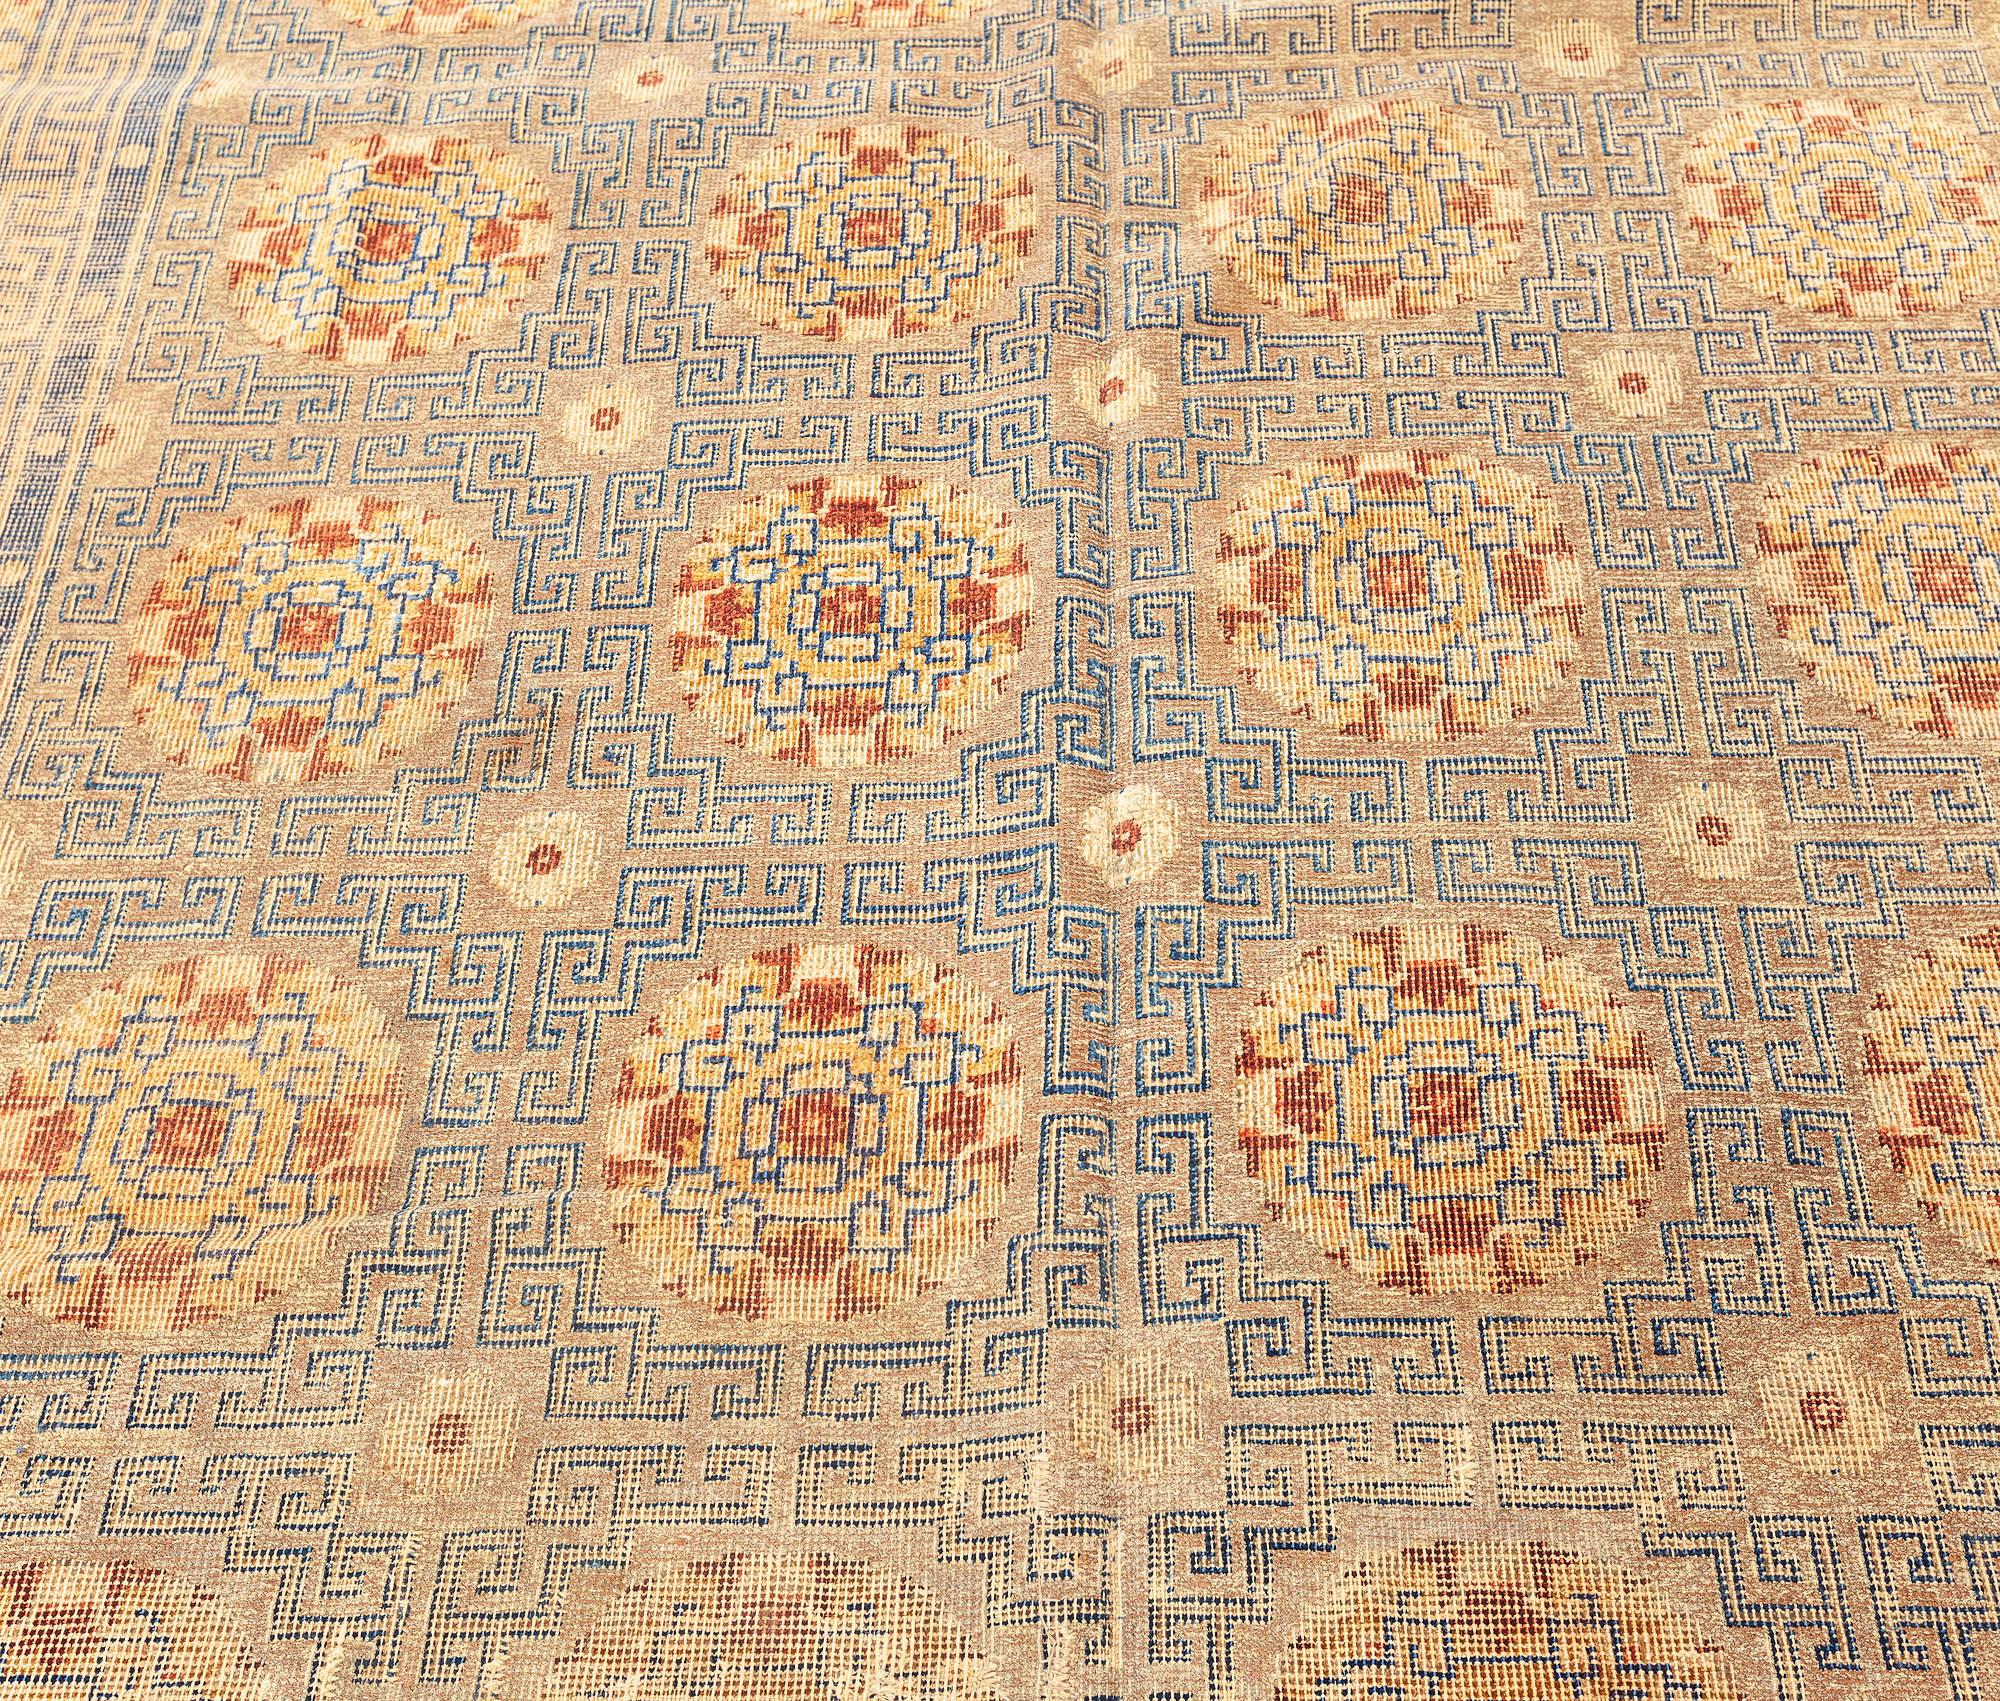 High-quality Antique Chinese Handmade Silk and Metal Thread Rug in Beige, Blue, Orange, Yellow
Size: 6'1